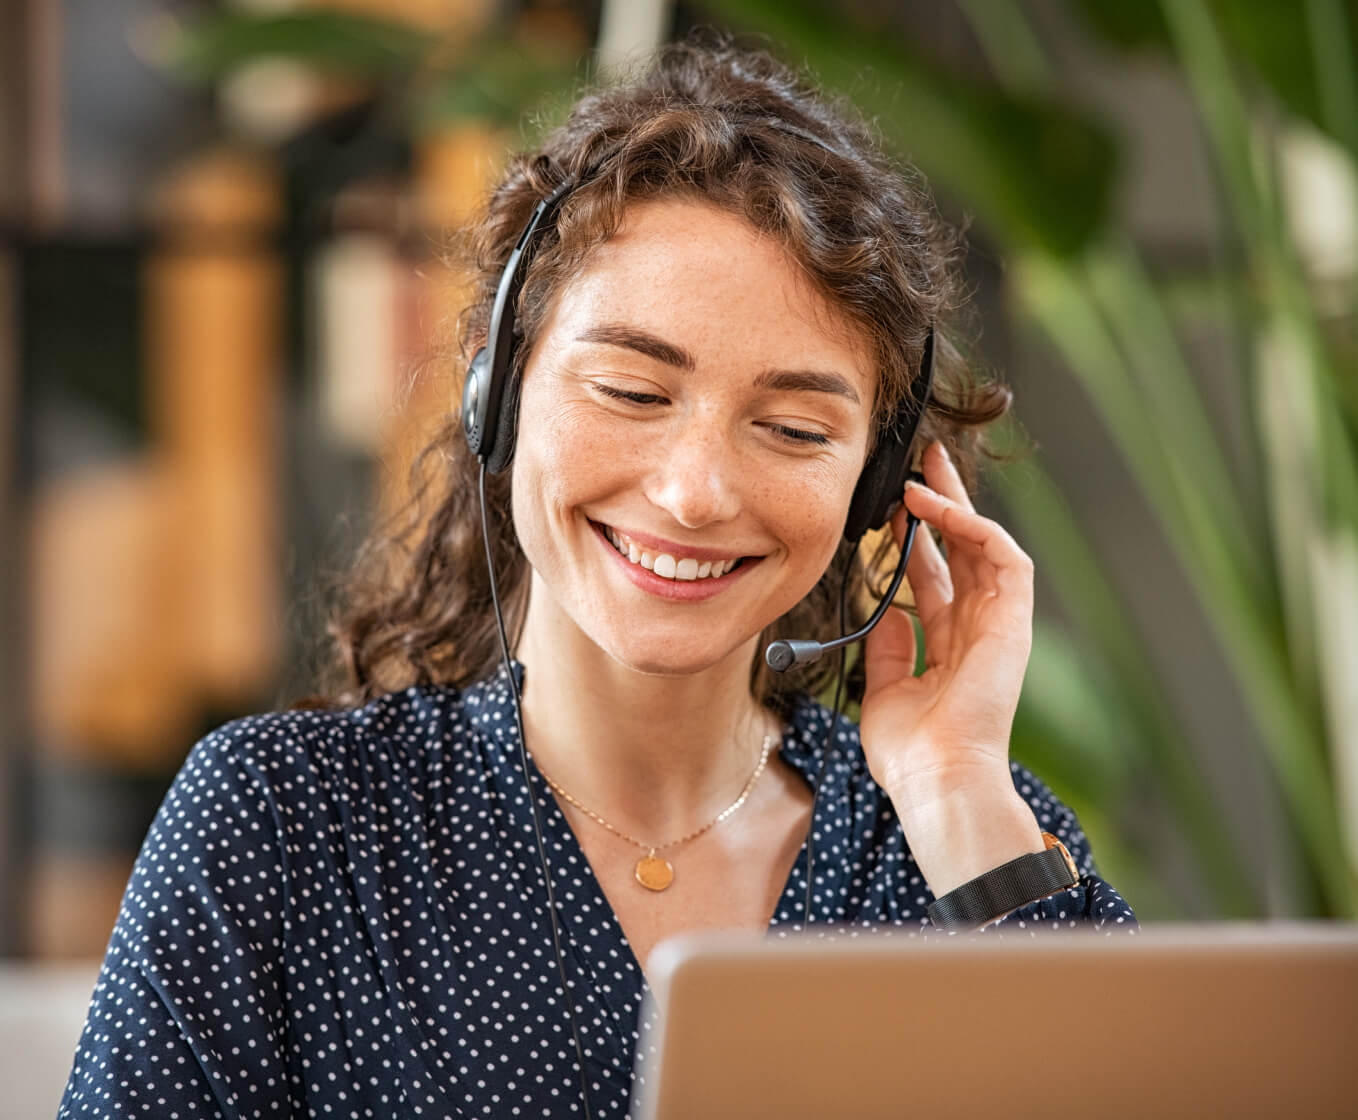 Customer support woman smiling at laptop while on a call on her headset